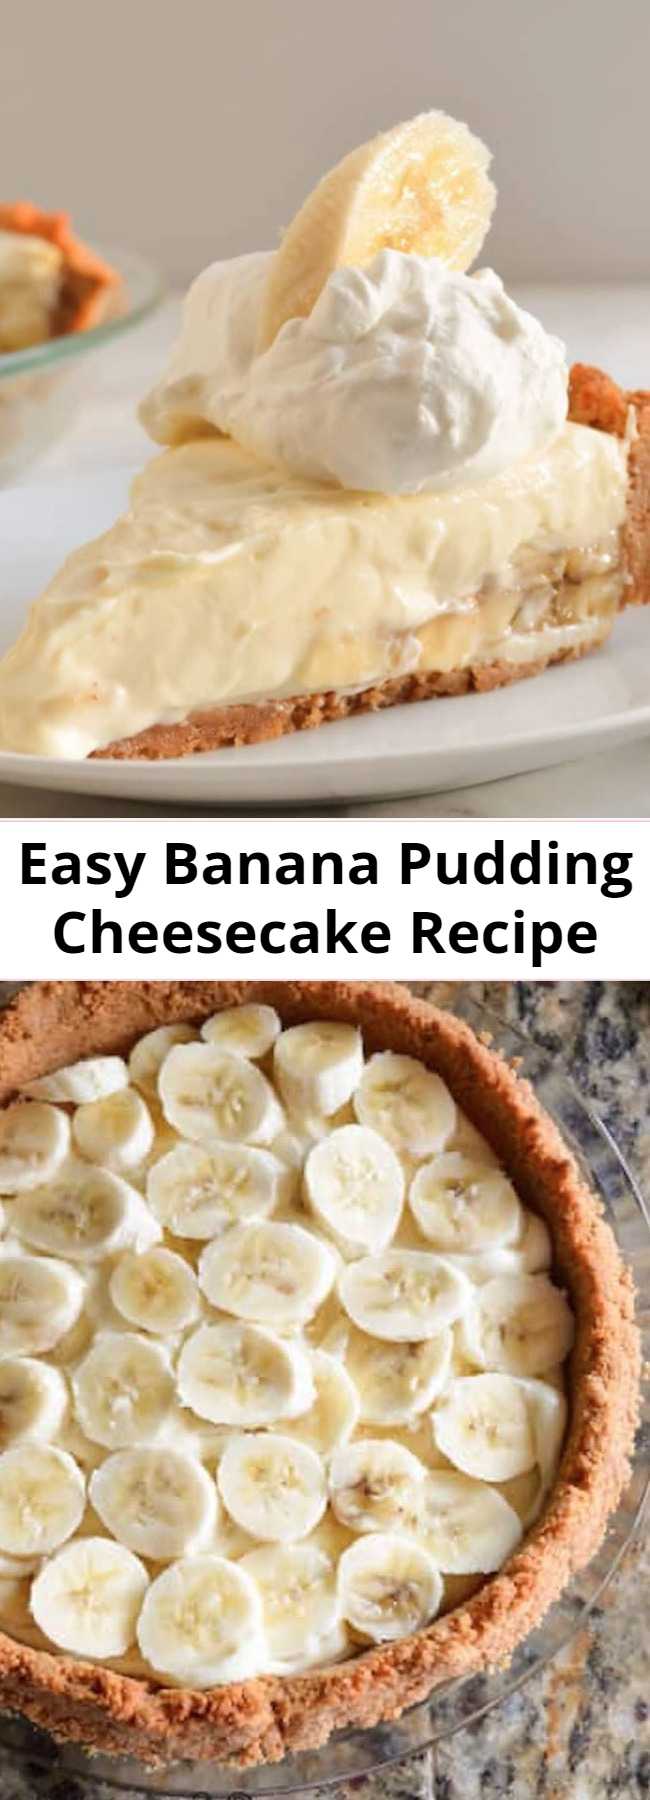 Easy Banana Pudding Cheesecake Recipe - Banana Pudding Cheese is the equivalent of Banana Cream Pie meets No Bake Cheesecake in this easy to make dessert recipe. Perfect for Thanksgiving and Christmas.